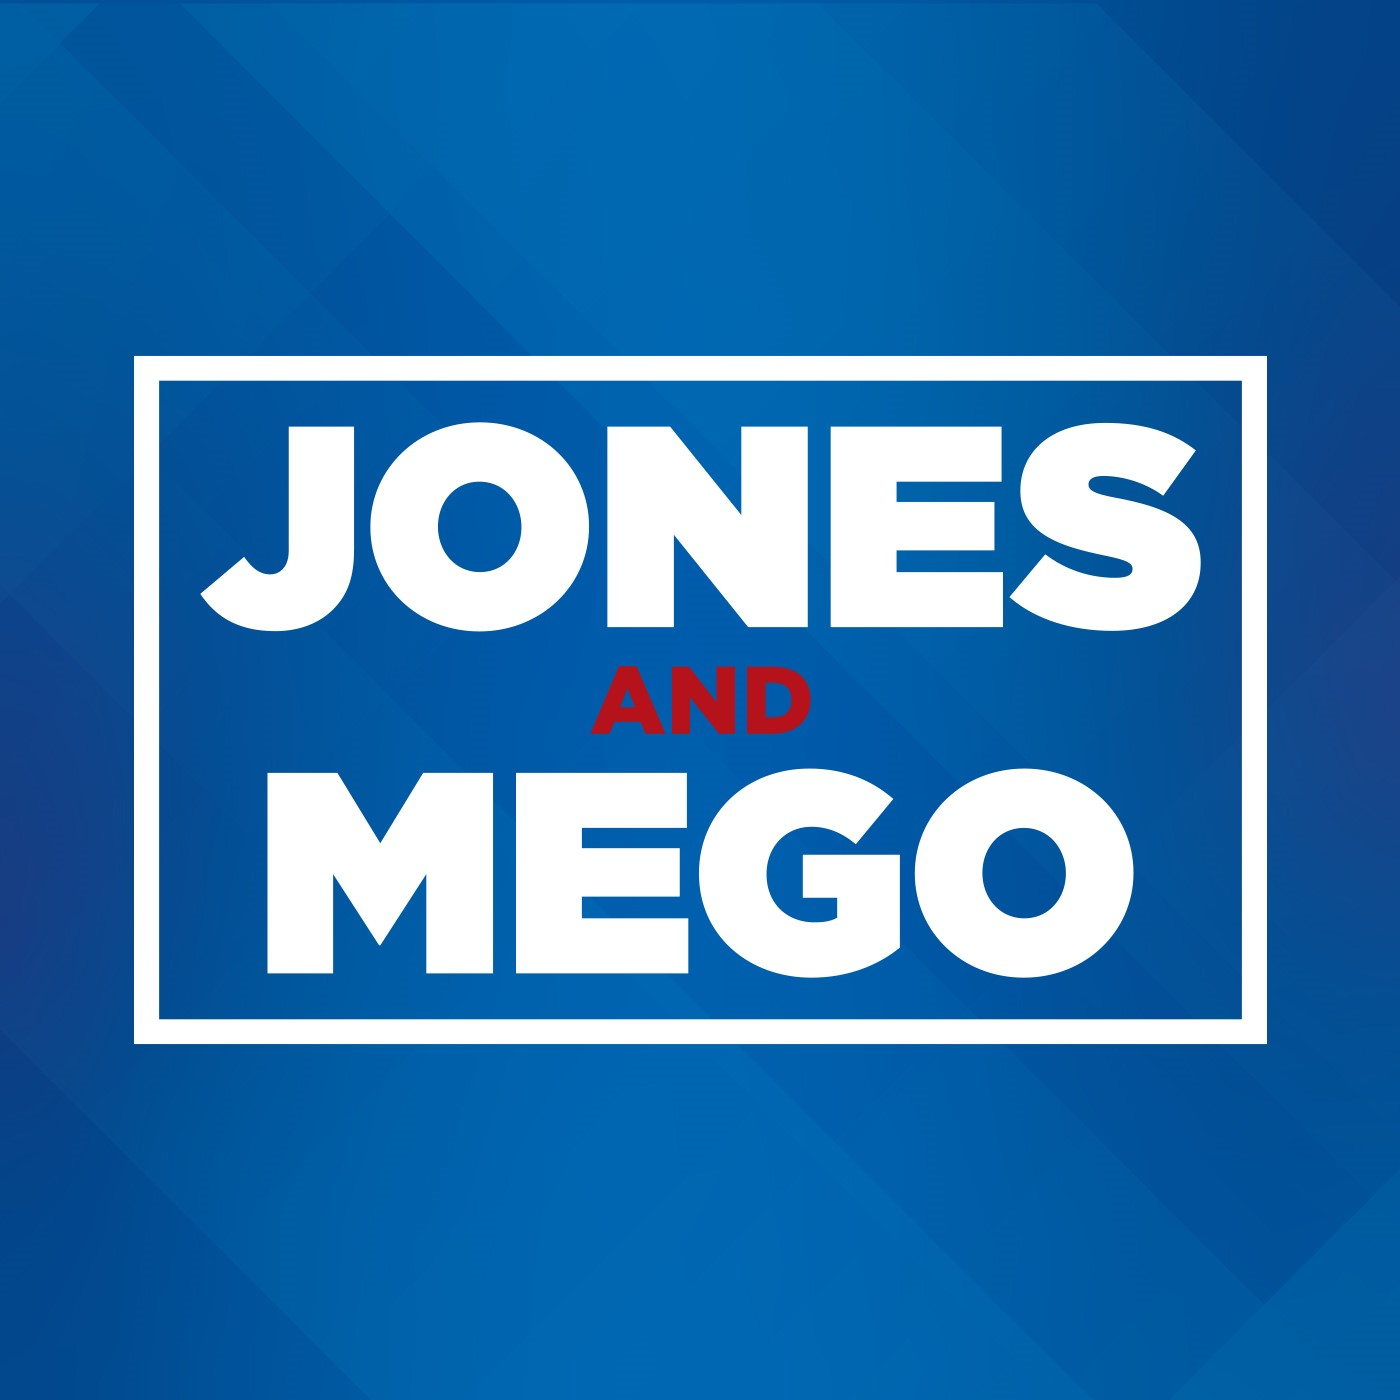 The first hour of the new NFL season with Jones, Mego, and Arcand